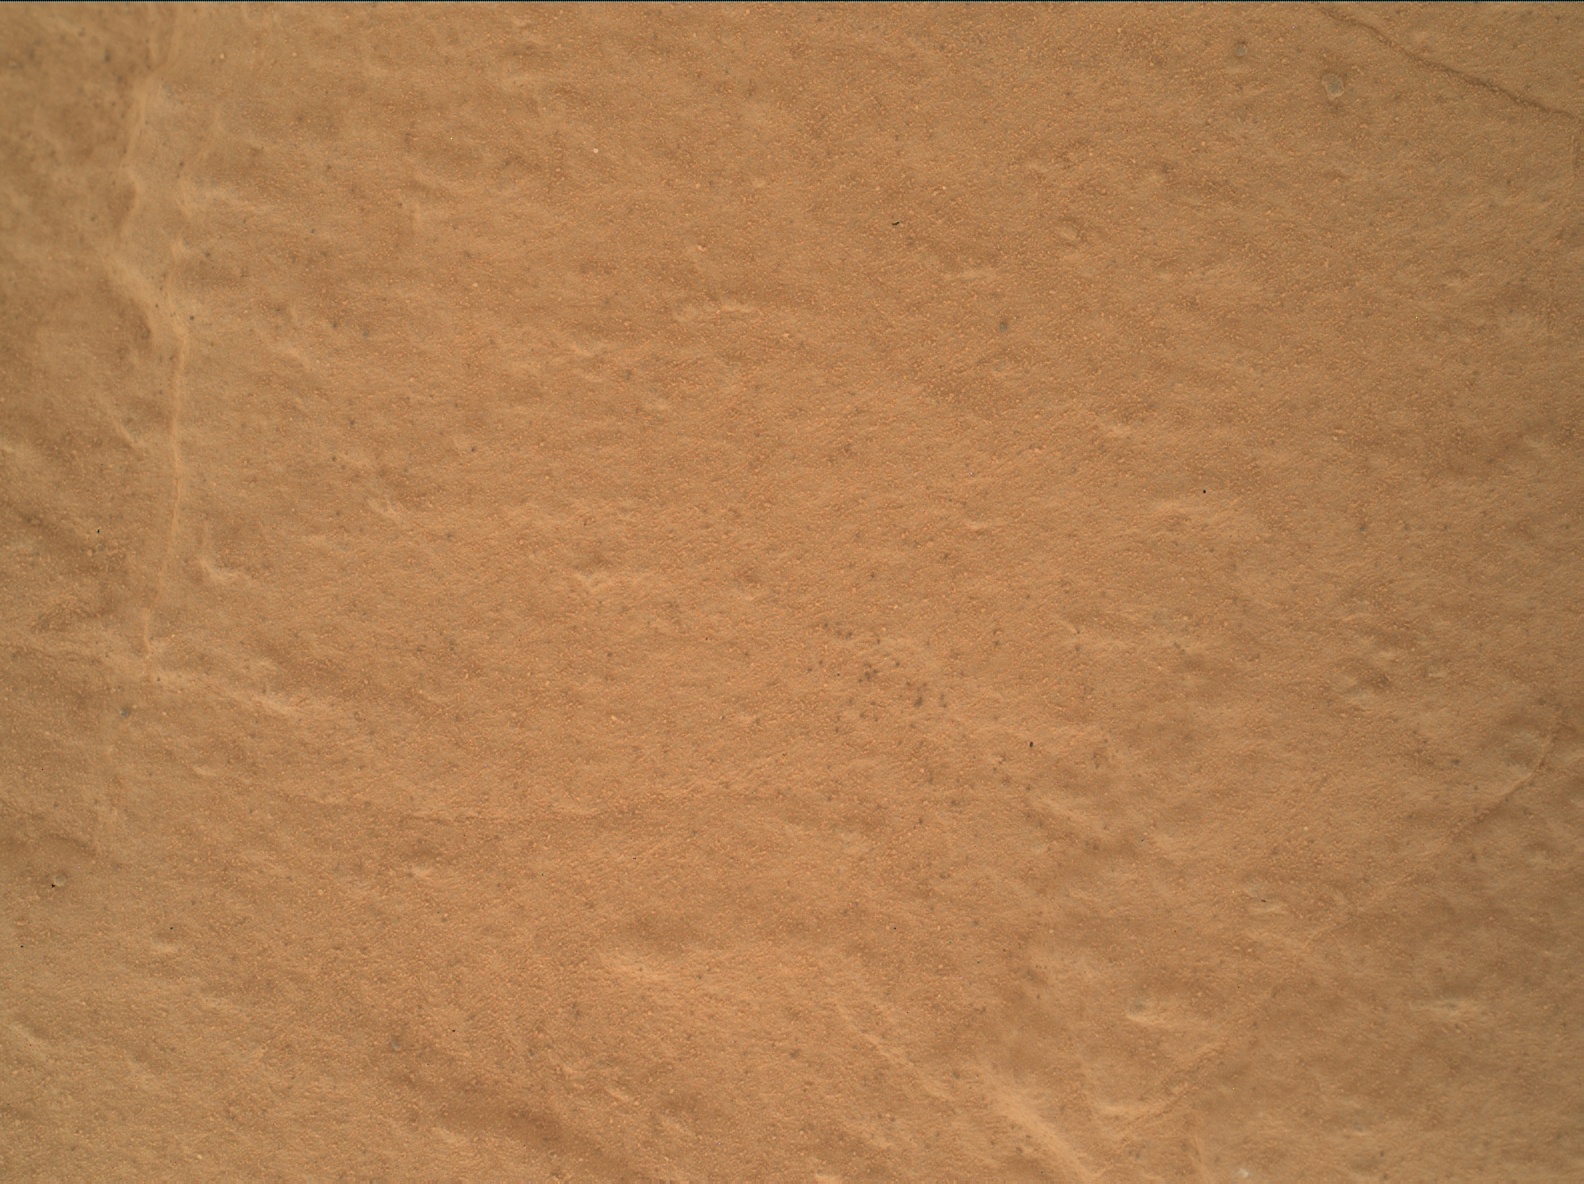 Nasa's Mars rover Curiosity acquired this image using its Mars Hand Lens Imager (MAHLI) on Sol 2572